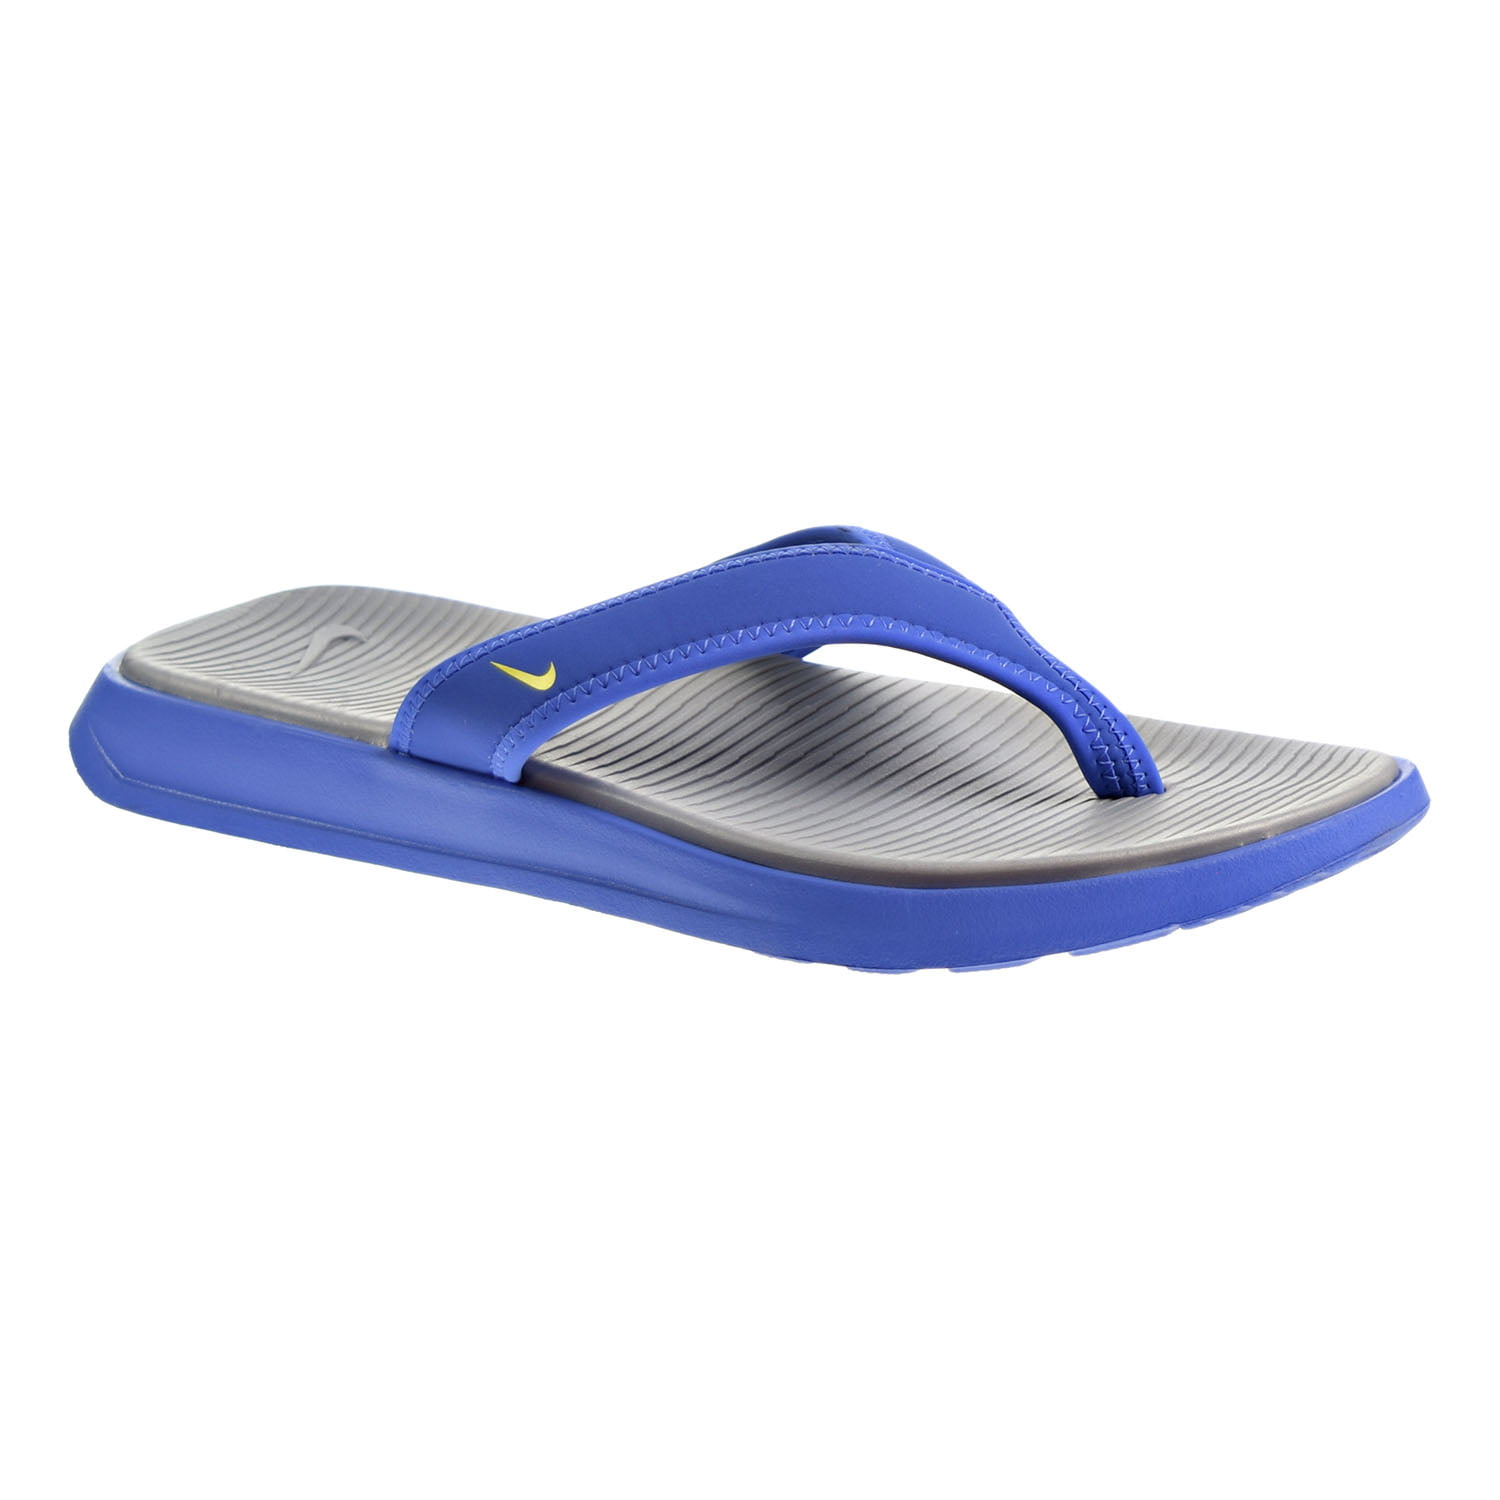 men's ultra celso thong sandals